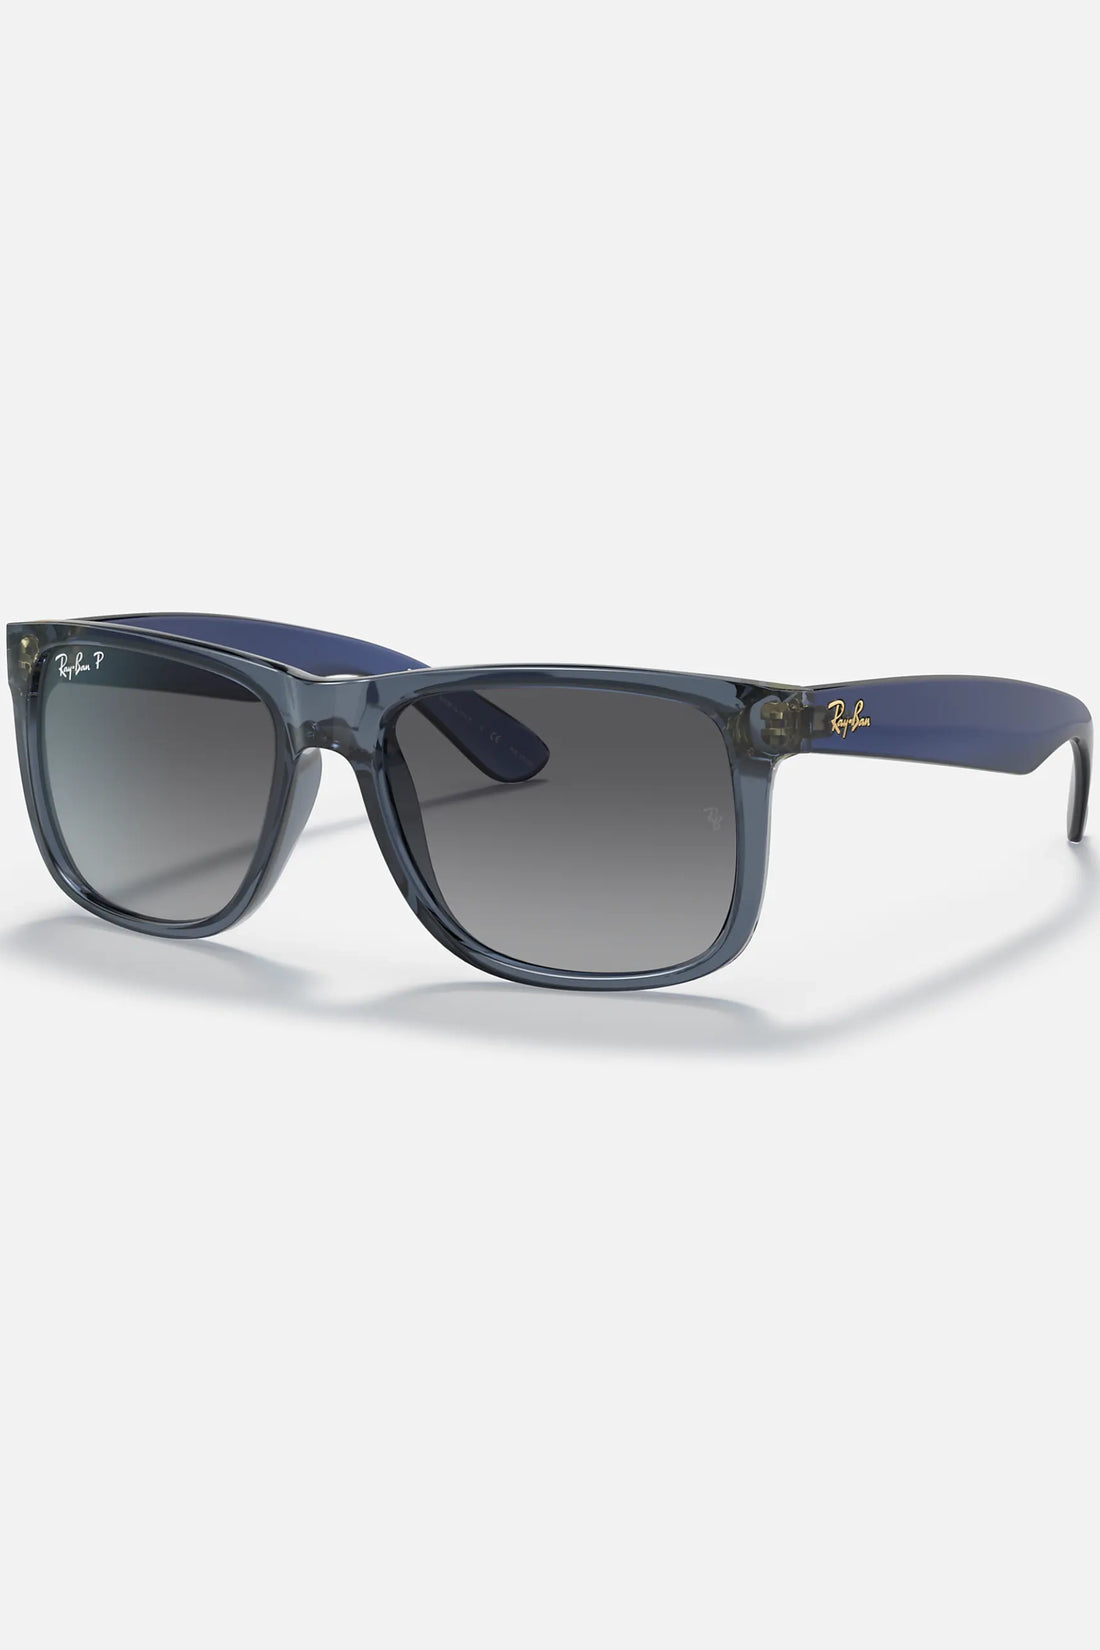 Ray-Ban RB4165 6596T3 54-16